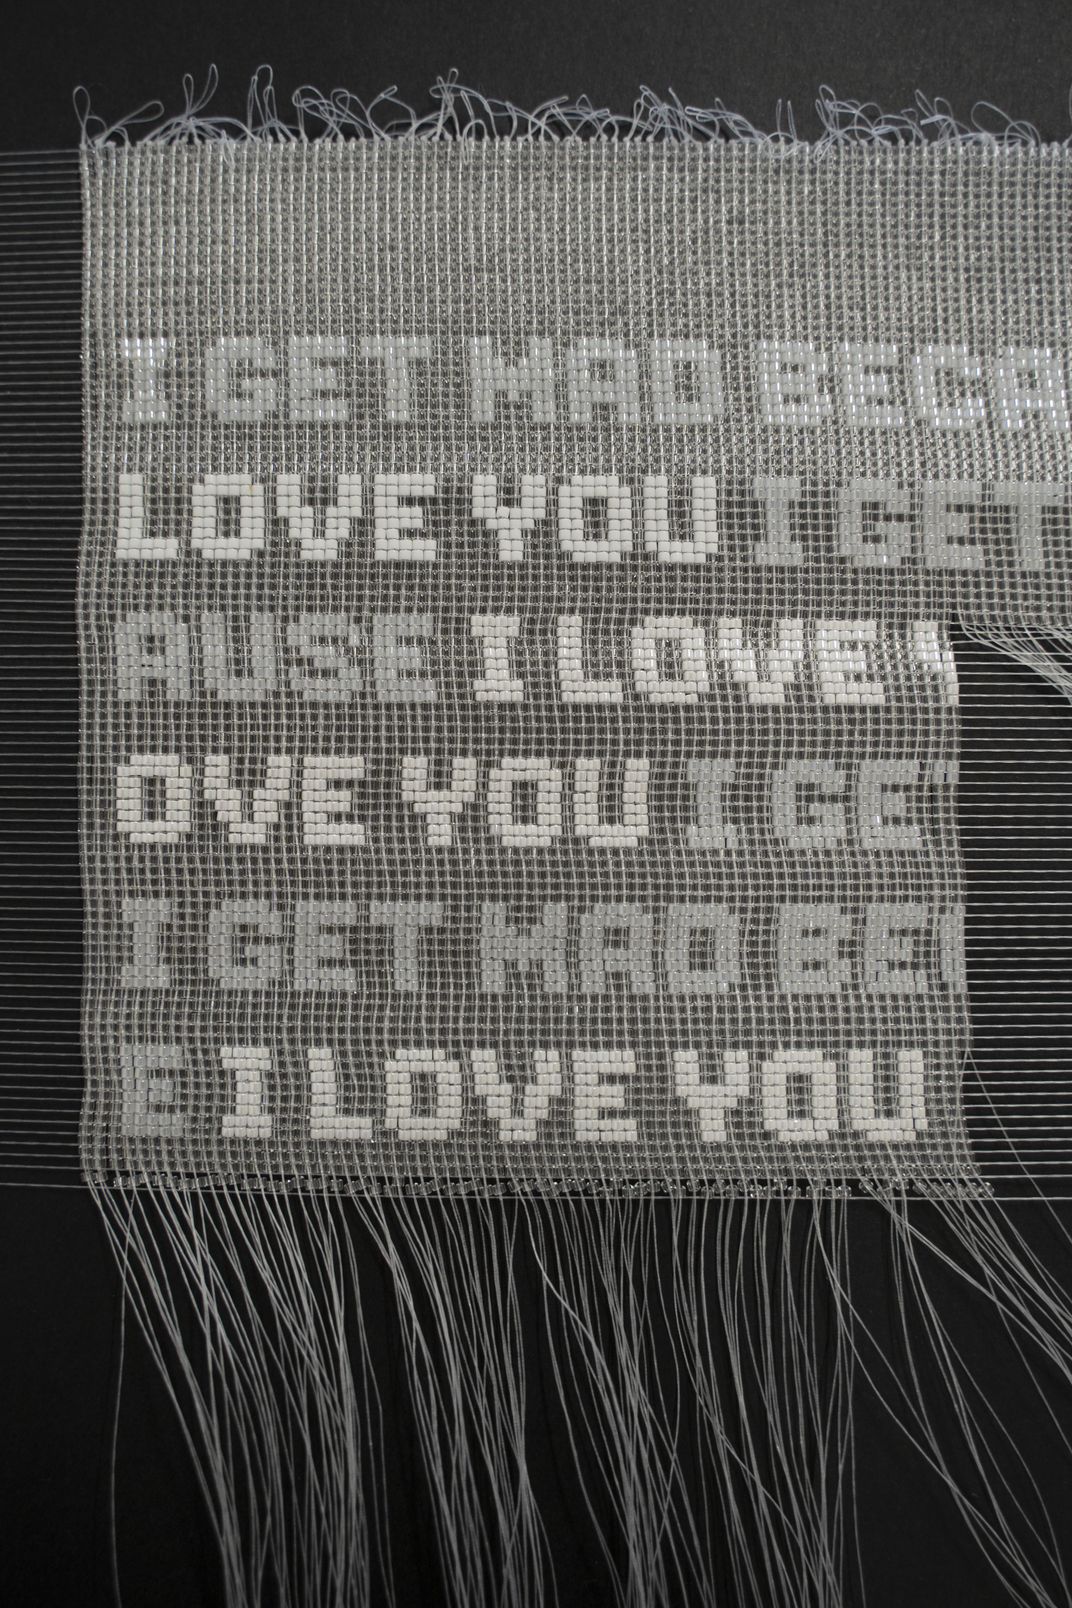 bead art with strings repeating the words "I get mad because I love you"